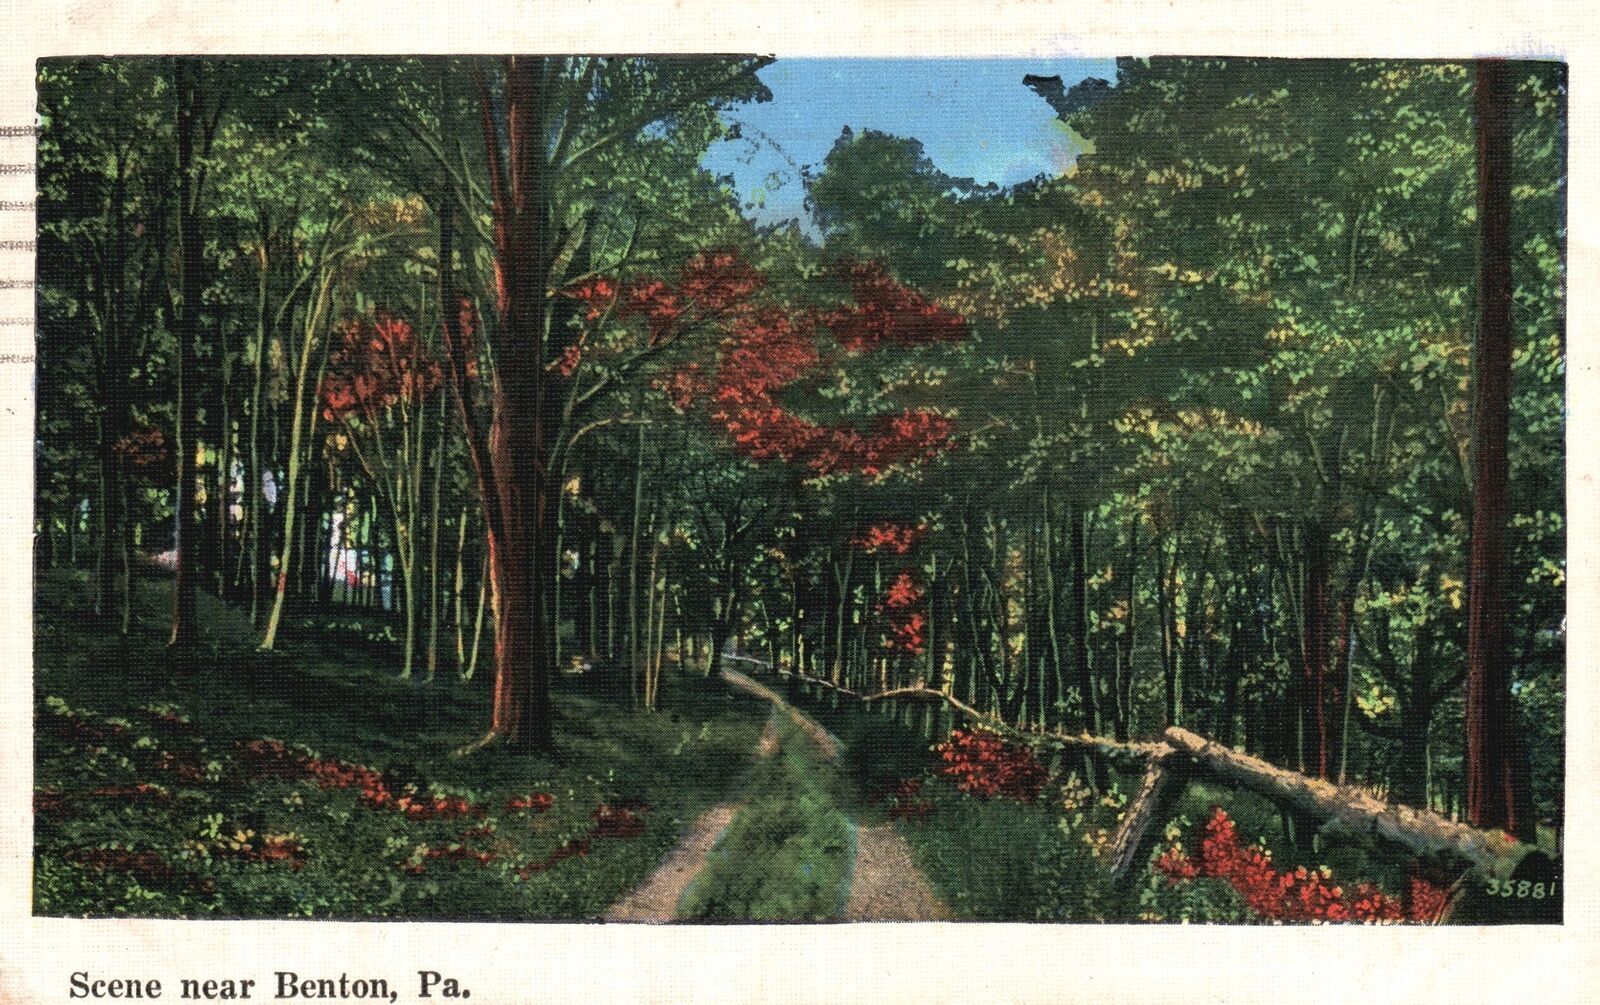 1938 Forest Trees Attraction Soghtseeing Benton Pennsylvania PA Posted Postcard